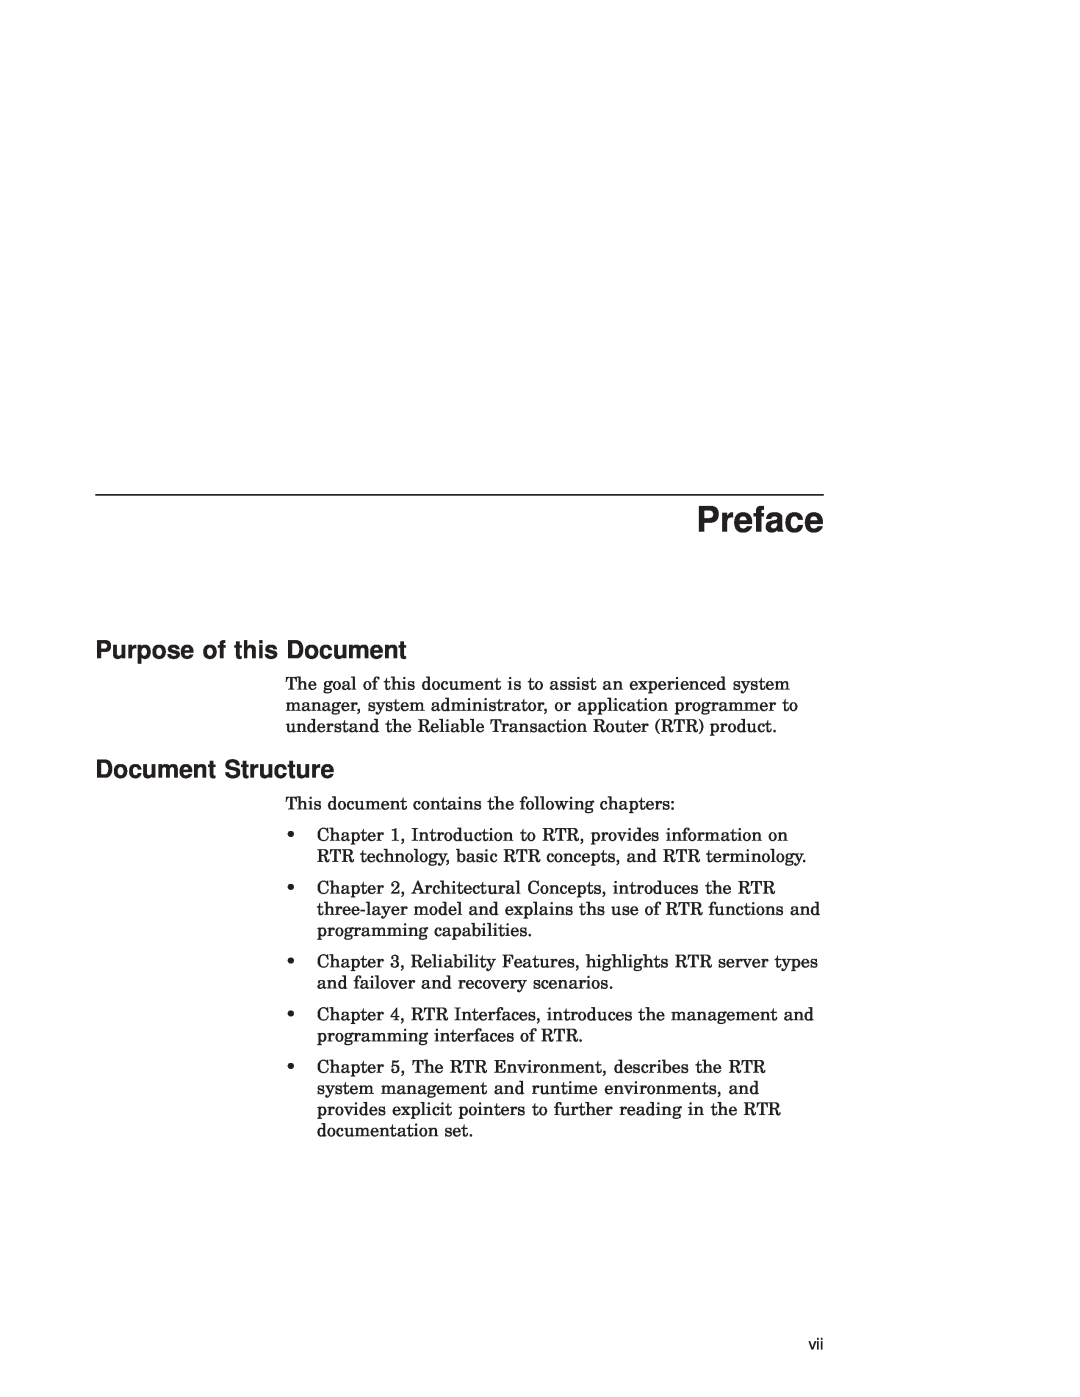 Compaq Reliable Transaction Router manual Preface, Purpose of this Document, Document Structure 